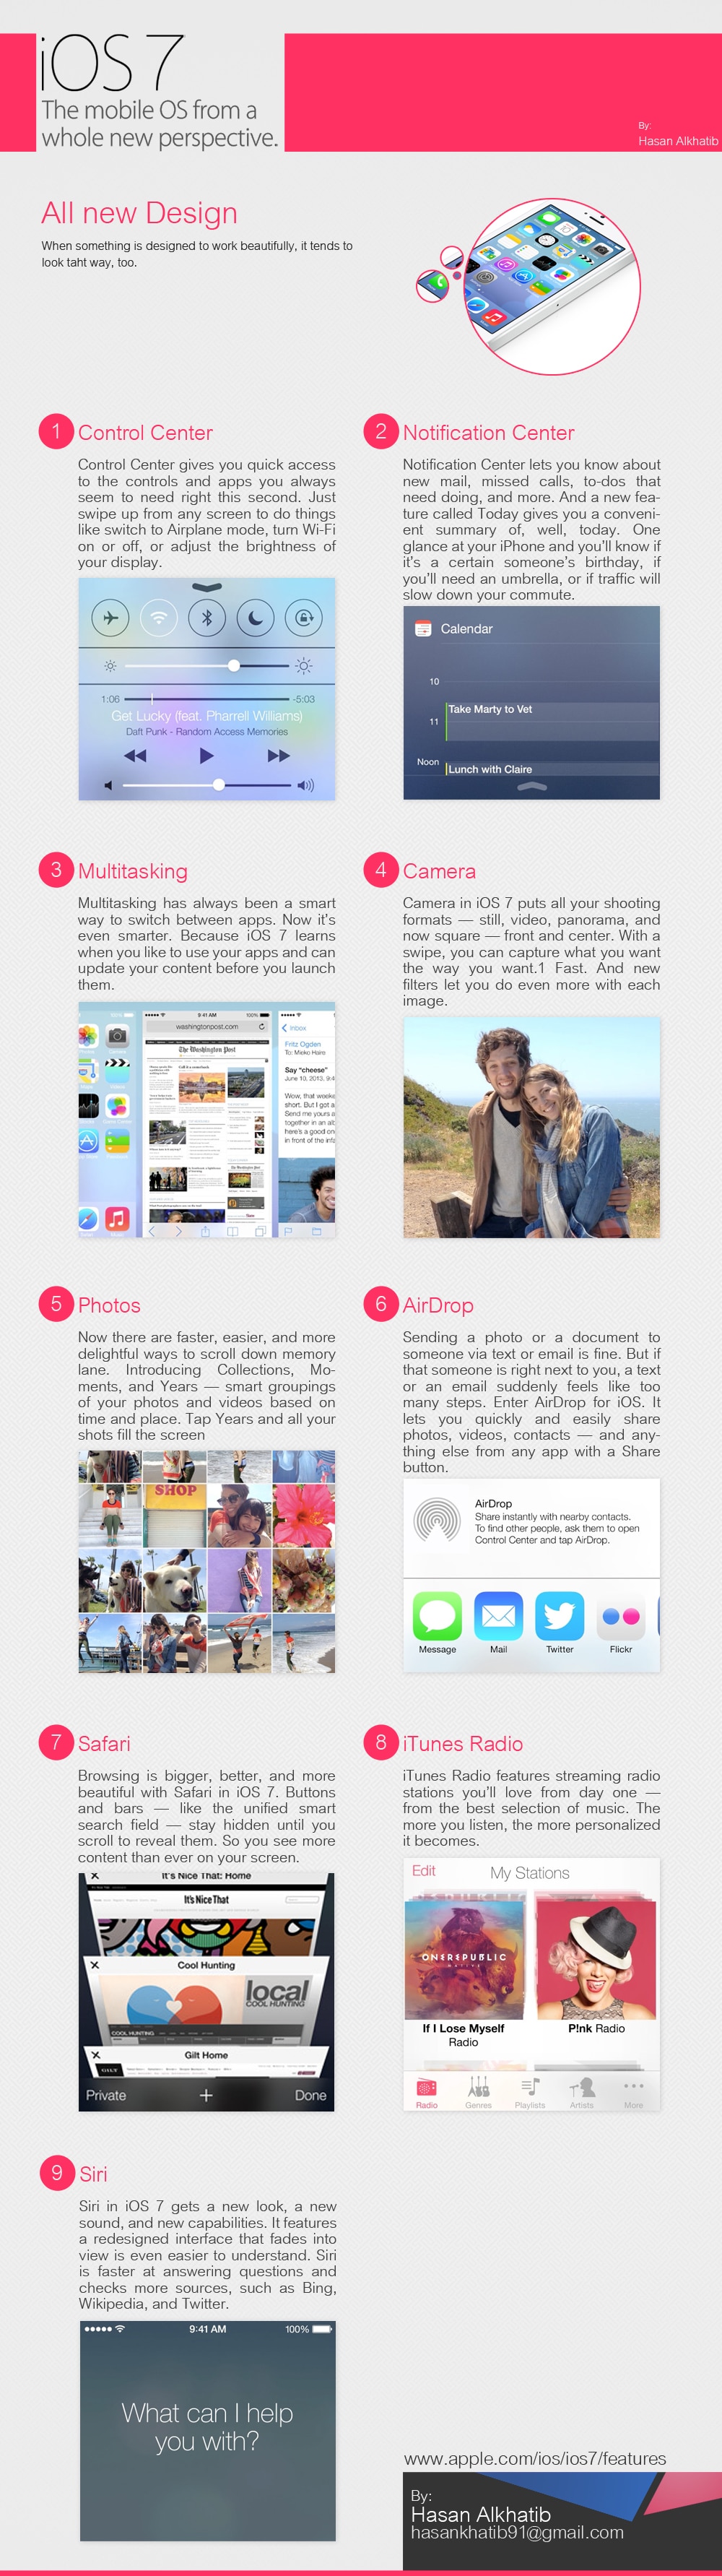 Complete iOS 7 Feature Overview [Infographic]